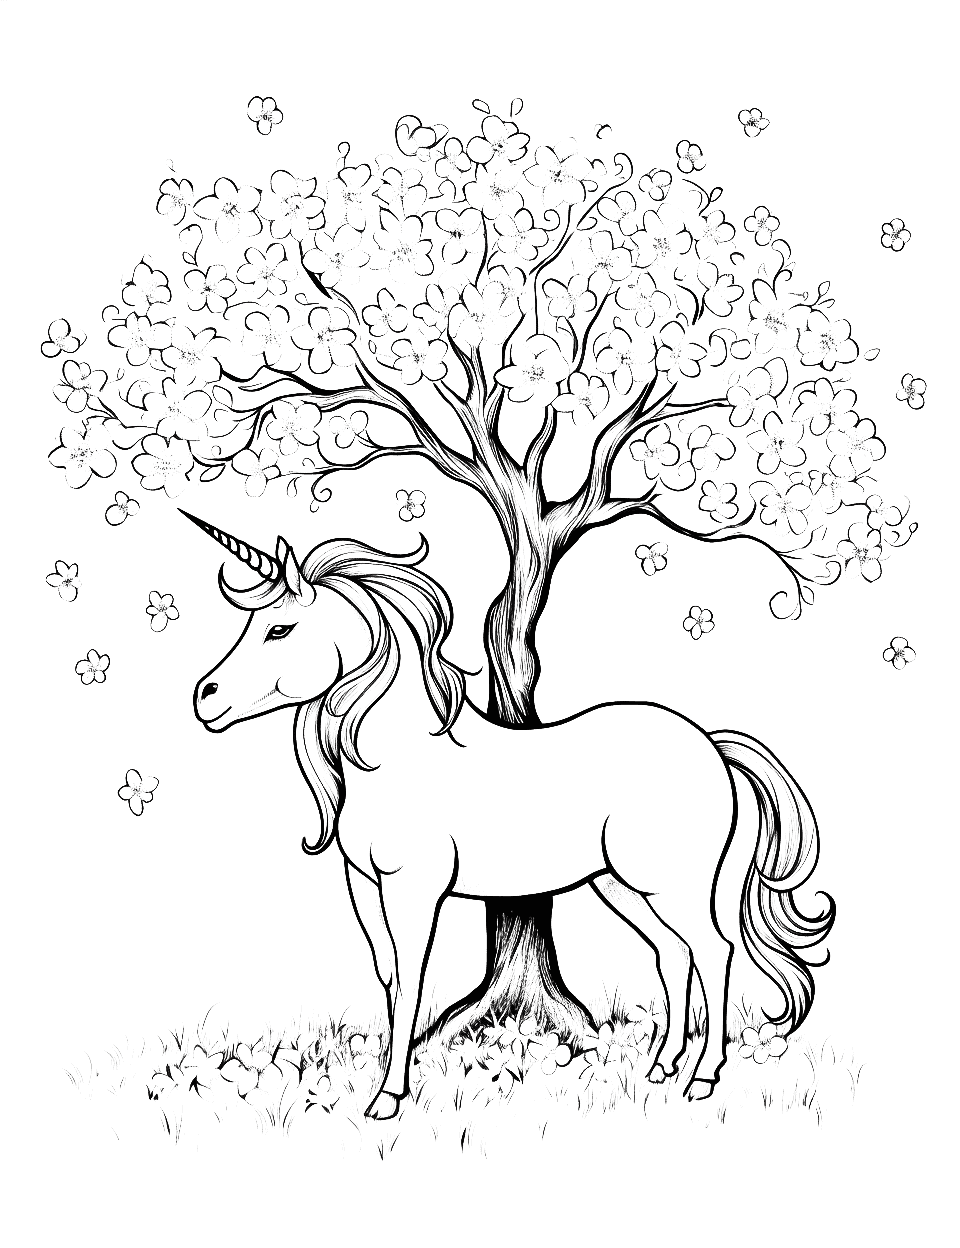 Unicorn and Cherry Blossoms Coloring Page - A unicorn resting under a cherry blossom tree, with petals falling around it.